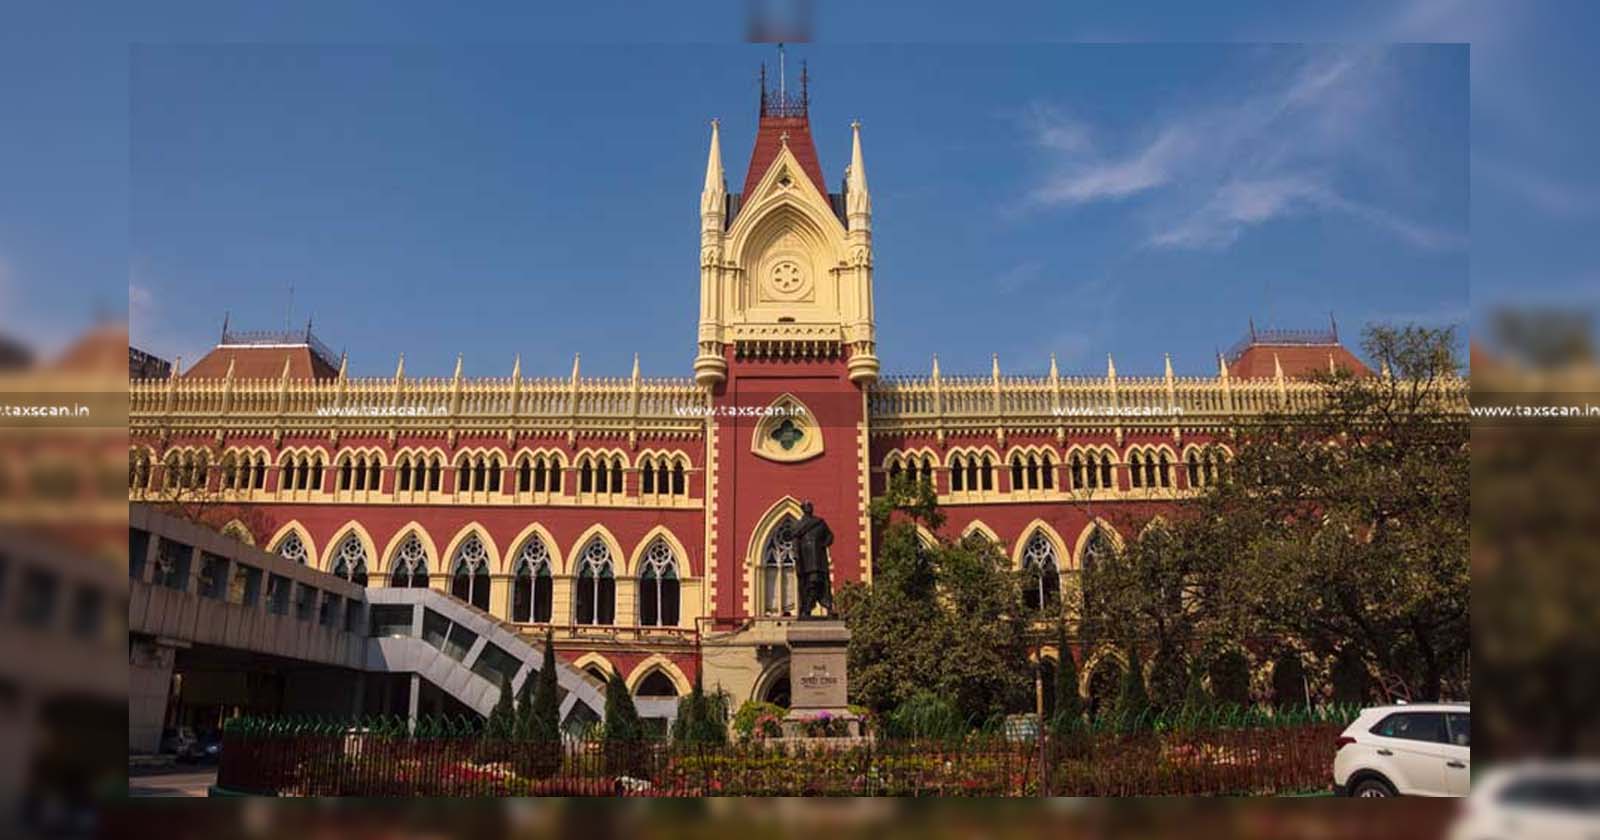 order passed - assessing officer - natural justice principles - violation of natural justice principles - calcutta high court - re adjudicate - Taxscan